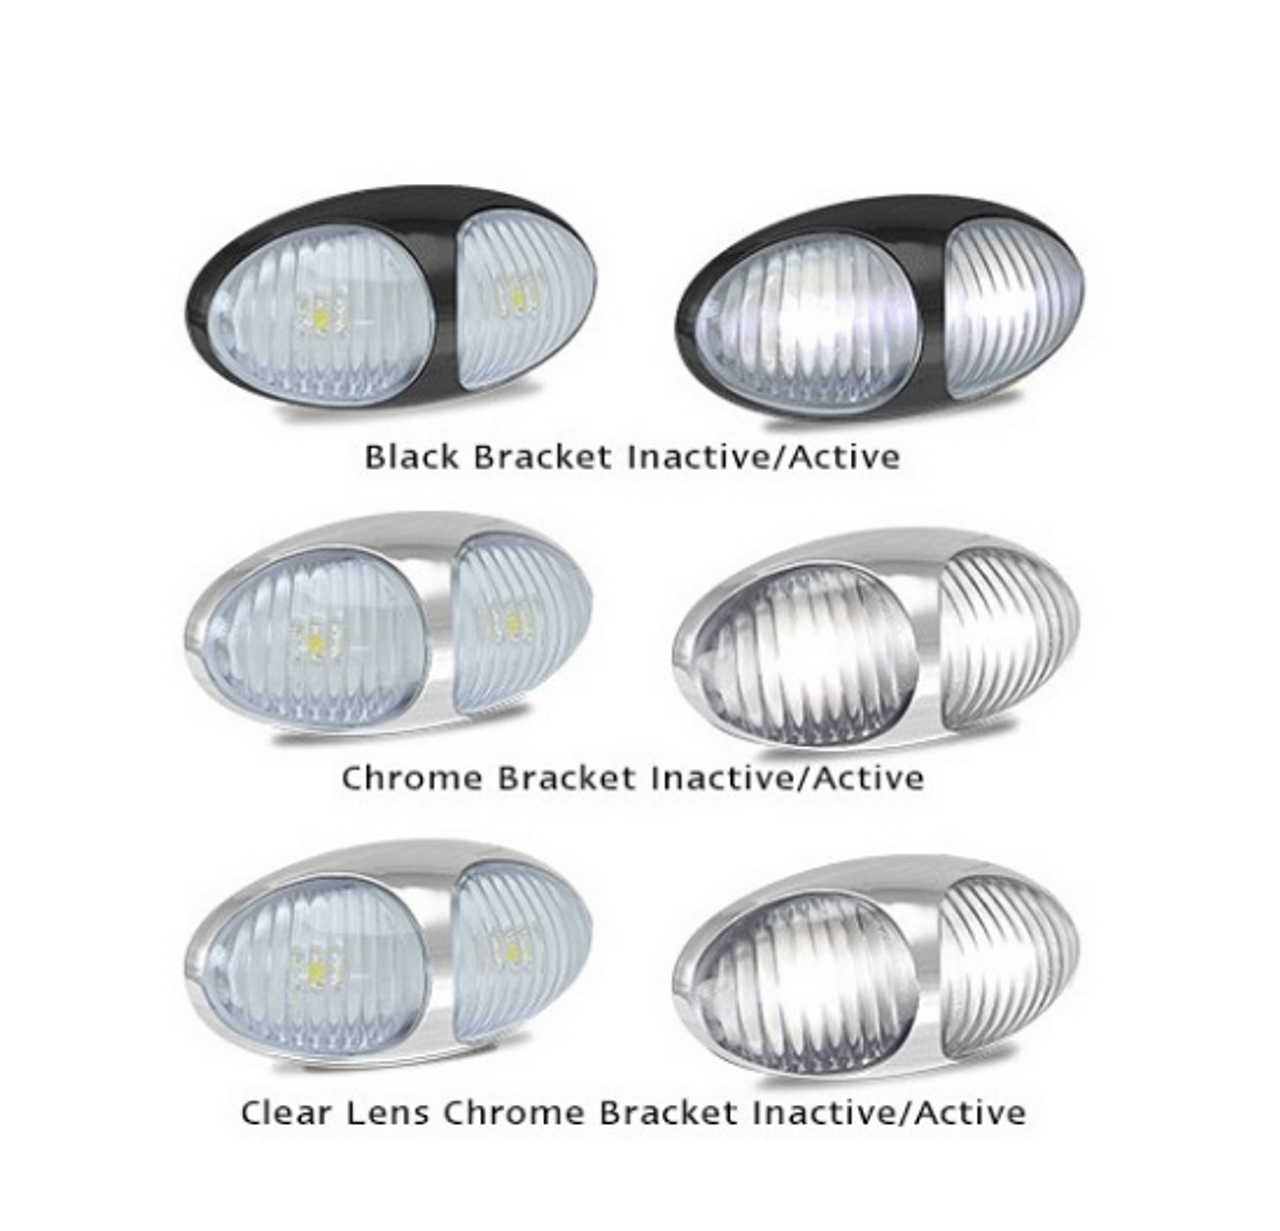 37 Series White LED - 37CWM - Front End Outline Marker with Chrome Base Multi-Volt Single Pack. LED Auto Lamps. Ultimate LED